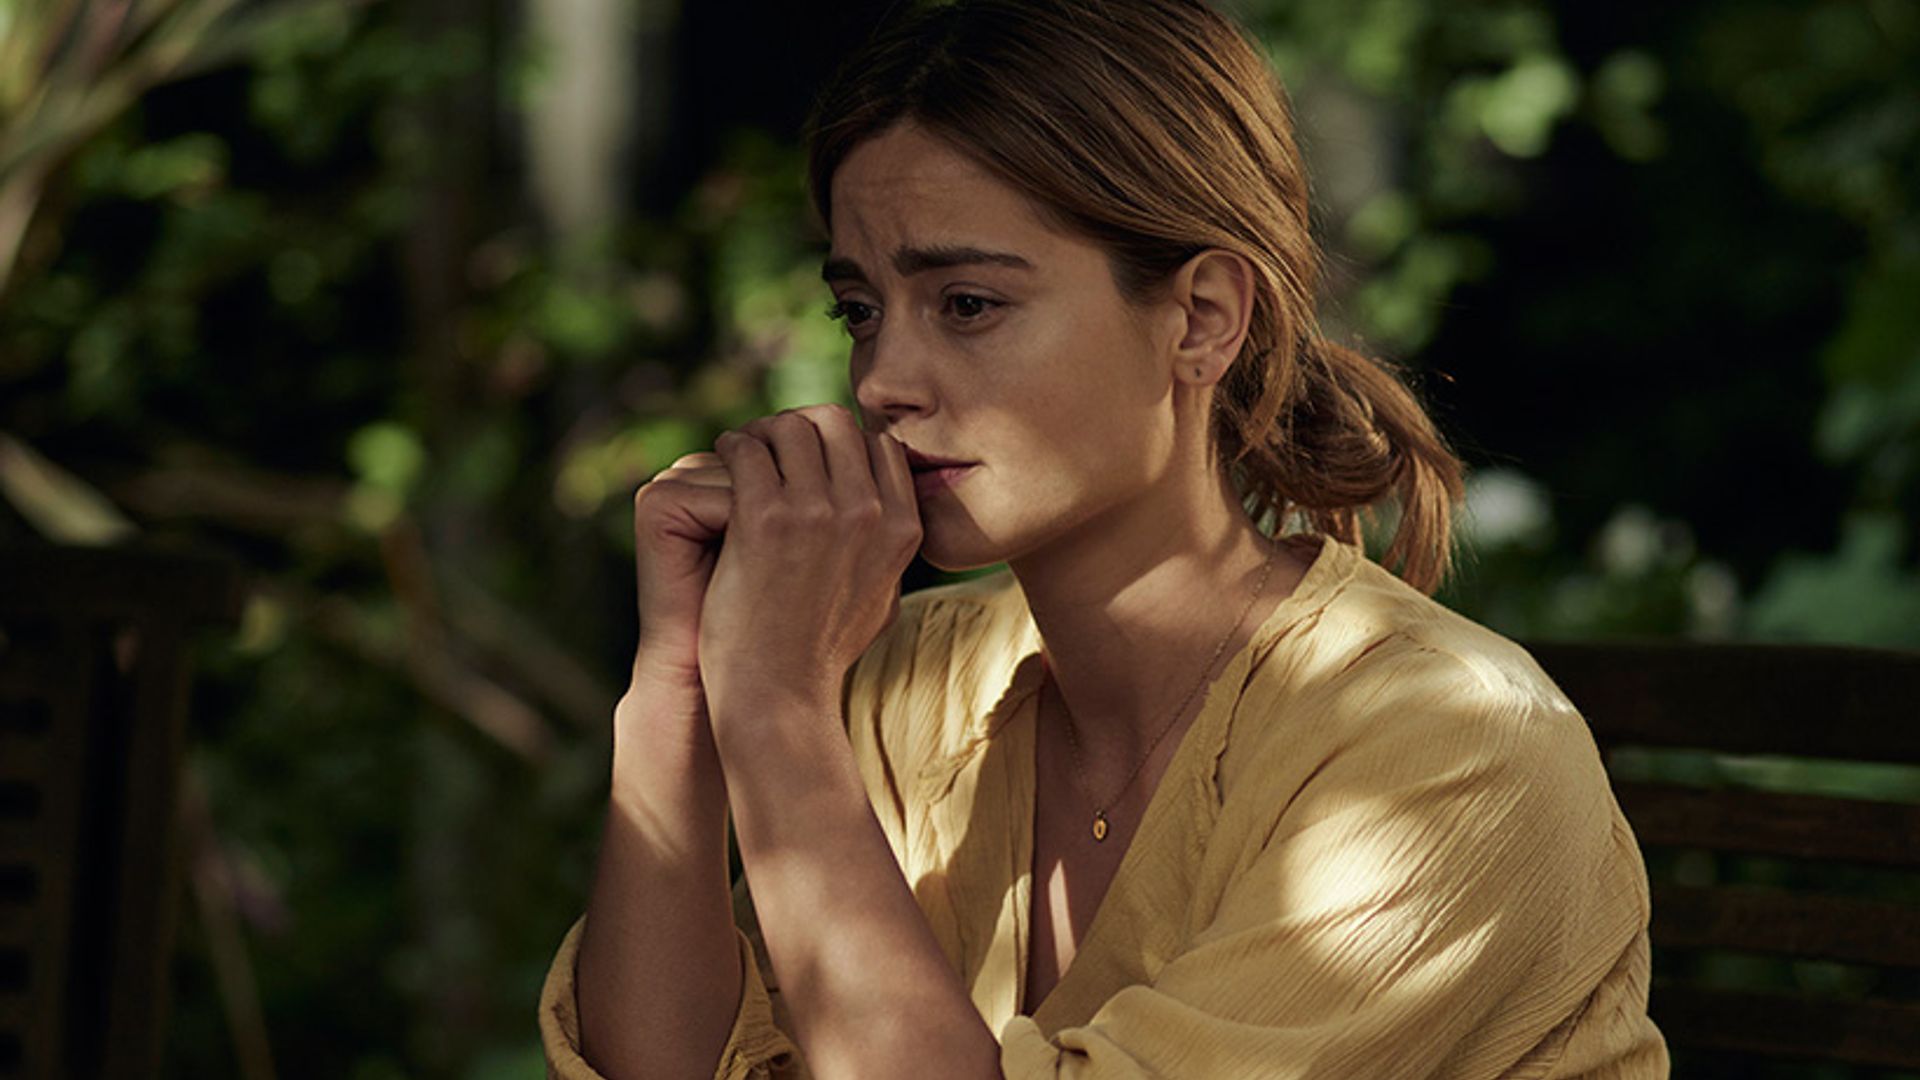 The Cry trailer is here and Jenna Coleman has already been praised for portrayal of devastated mother